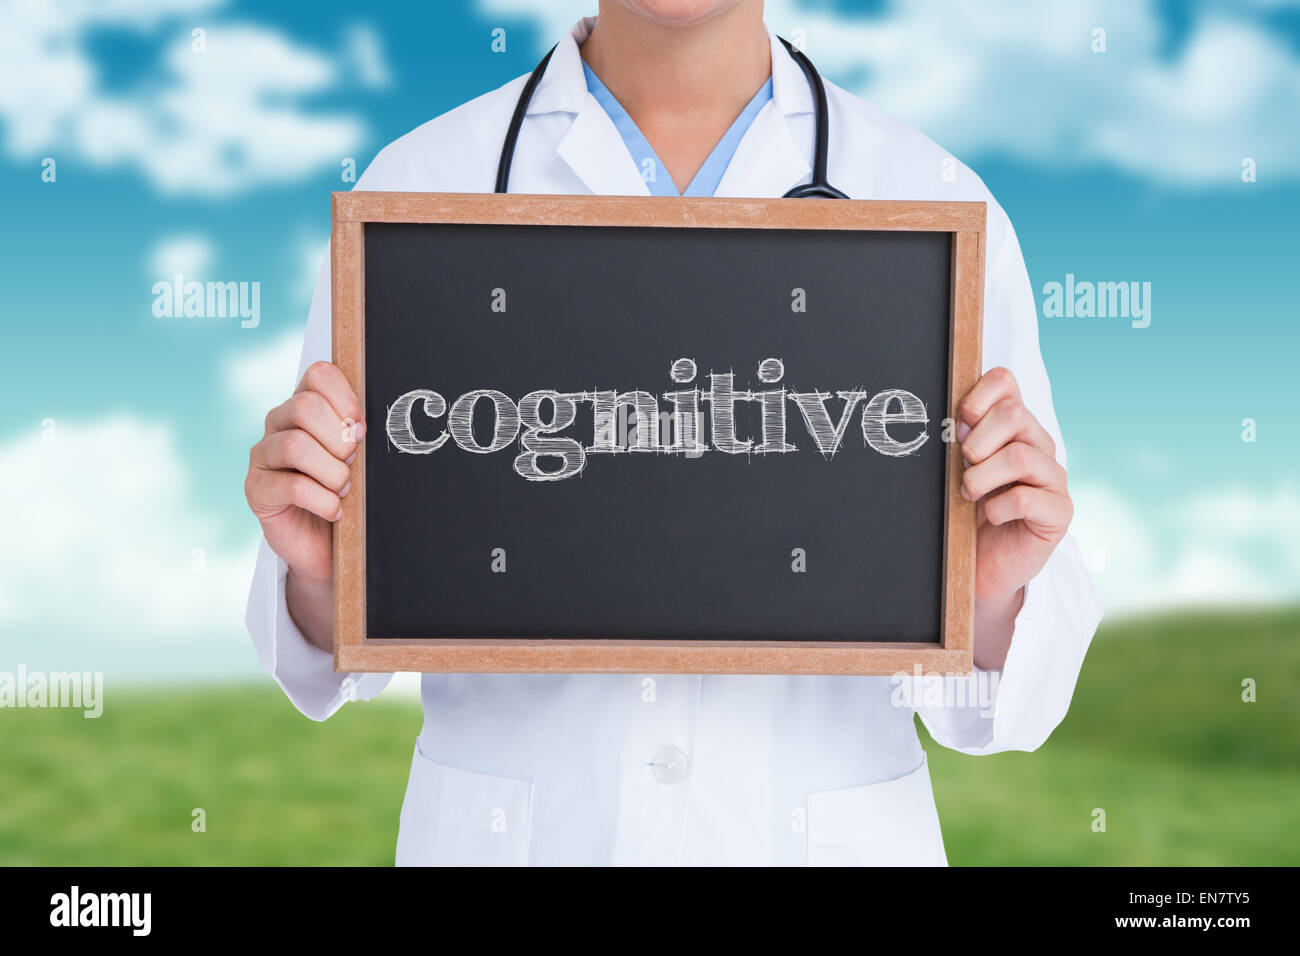 Cognitive against field and sky Stock Photo